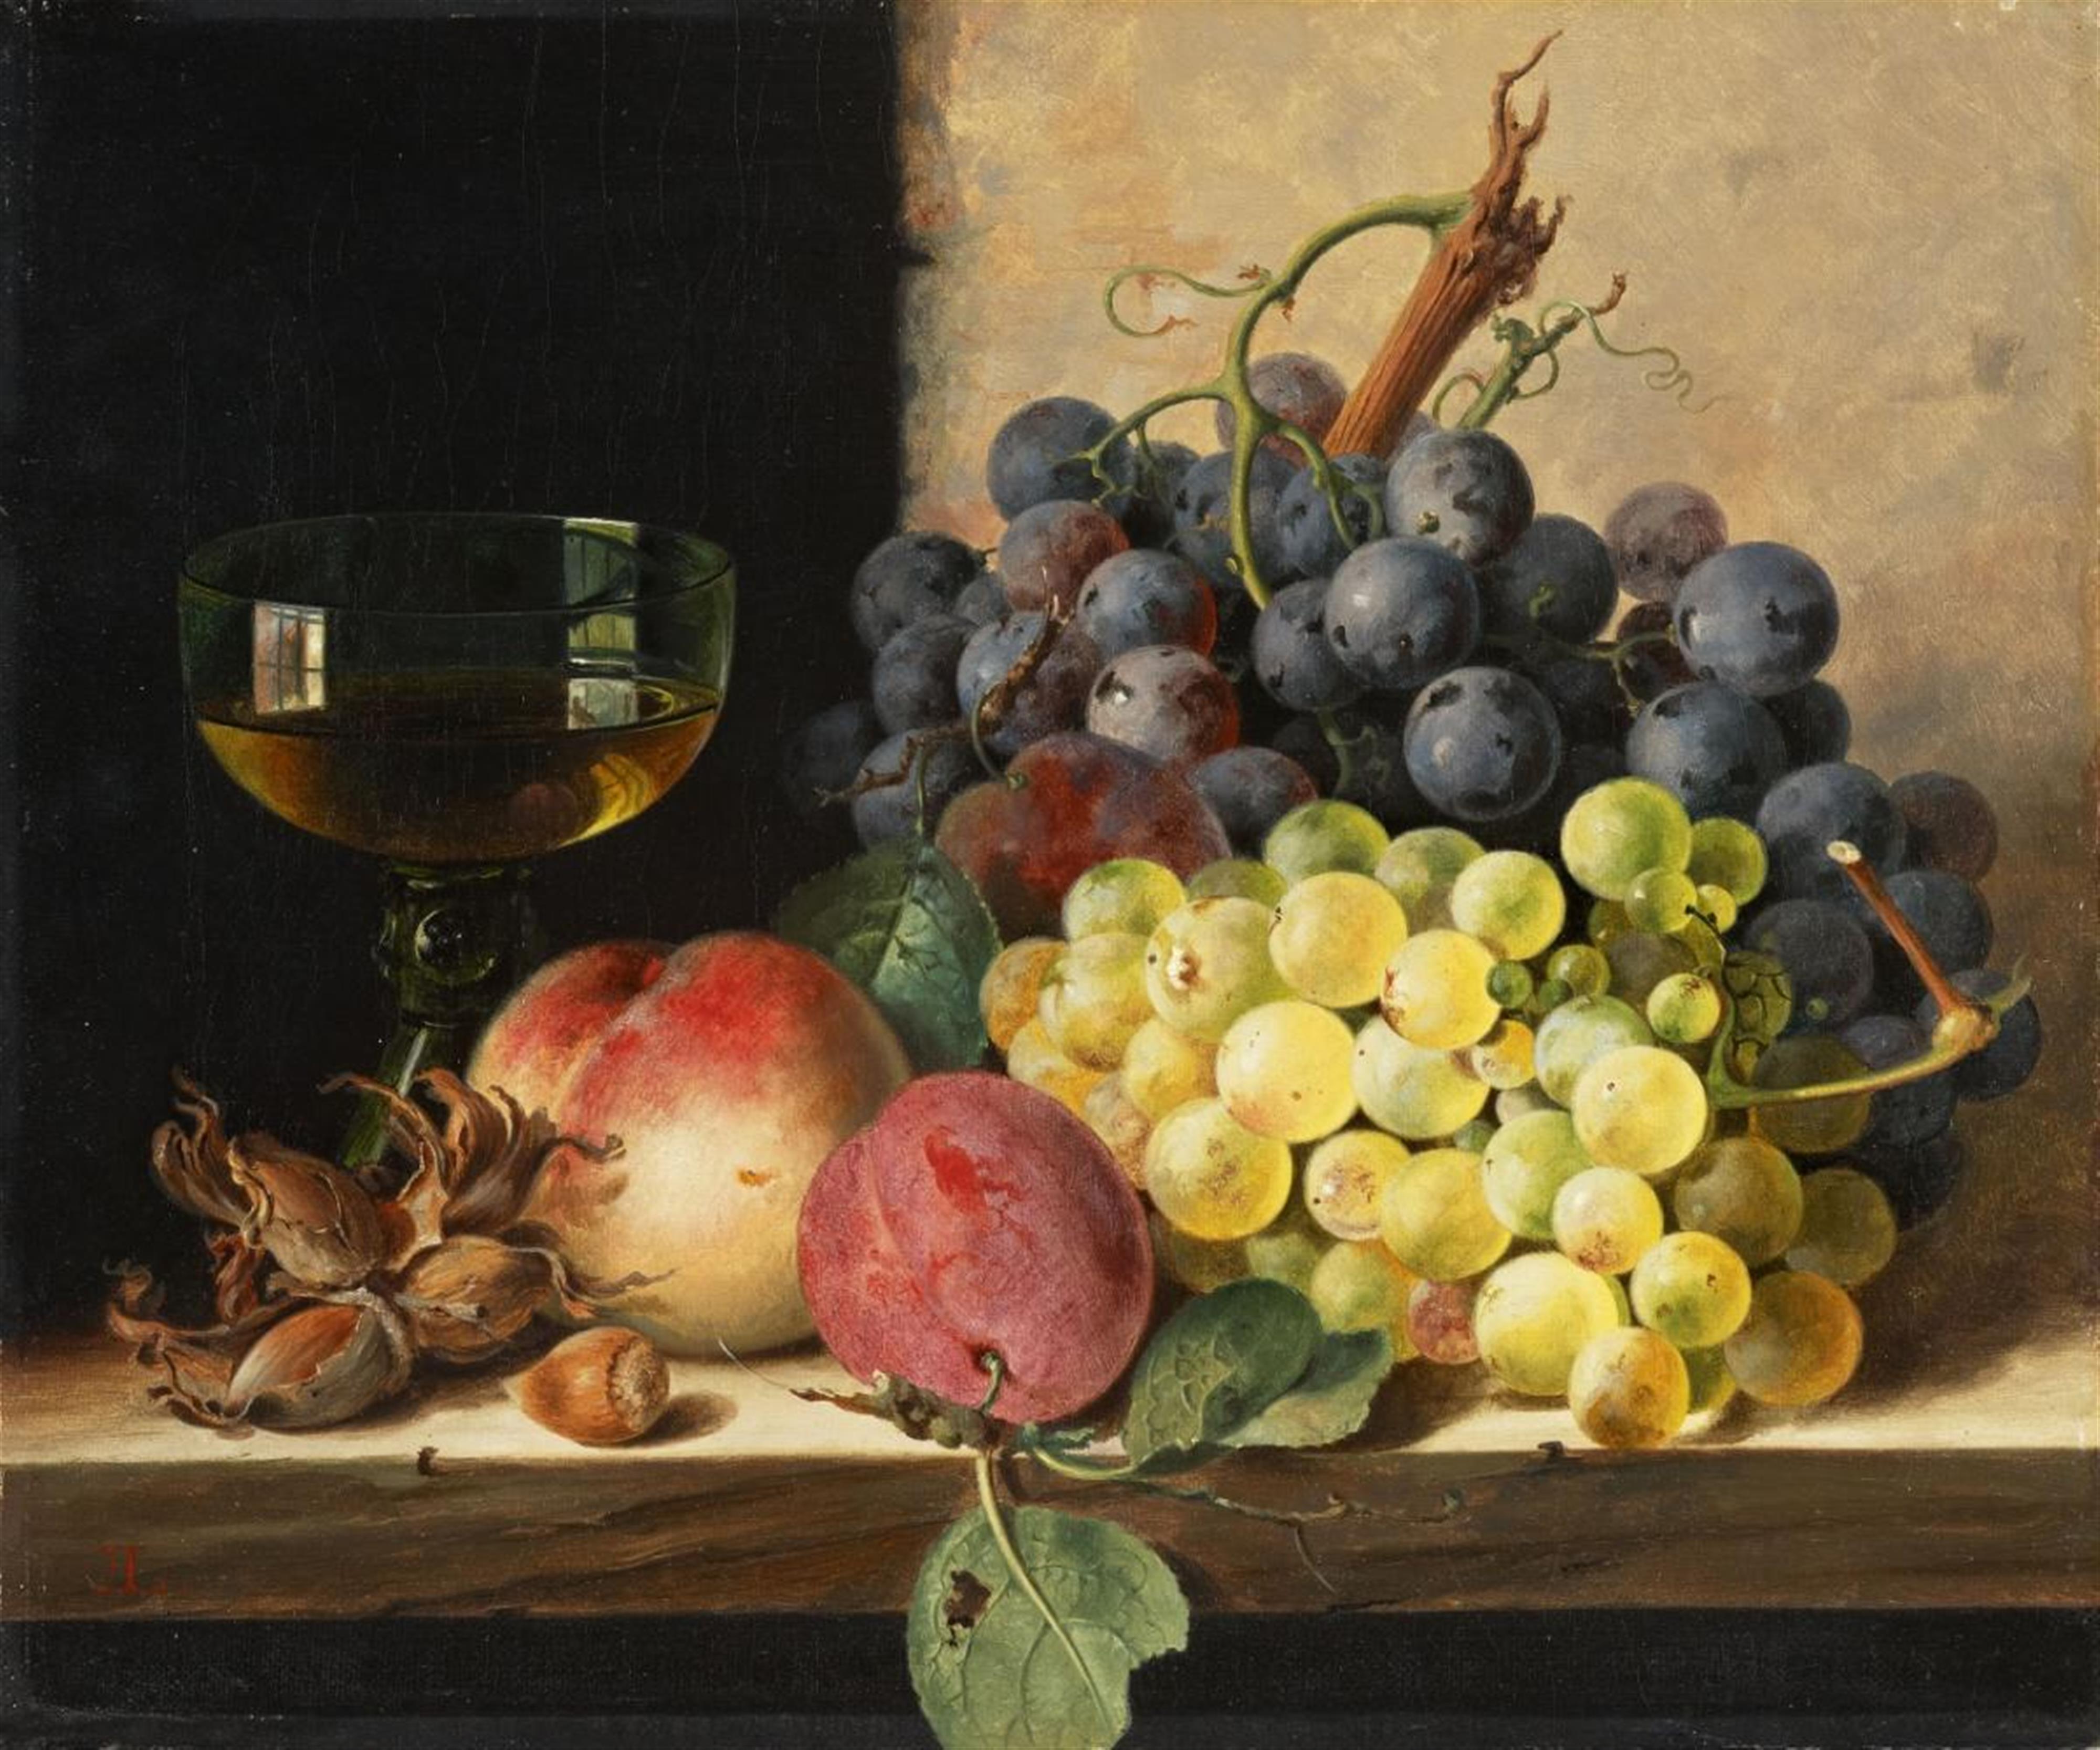 Edward Ladell - A STILL LIFE OF GRAPES, PLUMS, HAZELNUTS, A PEACH, AND A WINE GLASS ON A LEDGE - image-1